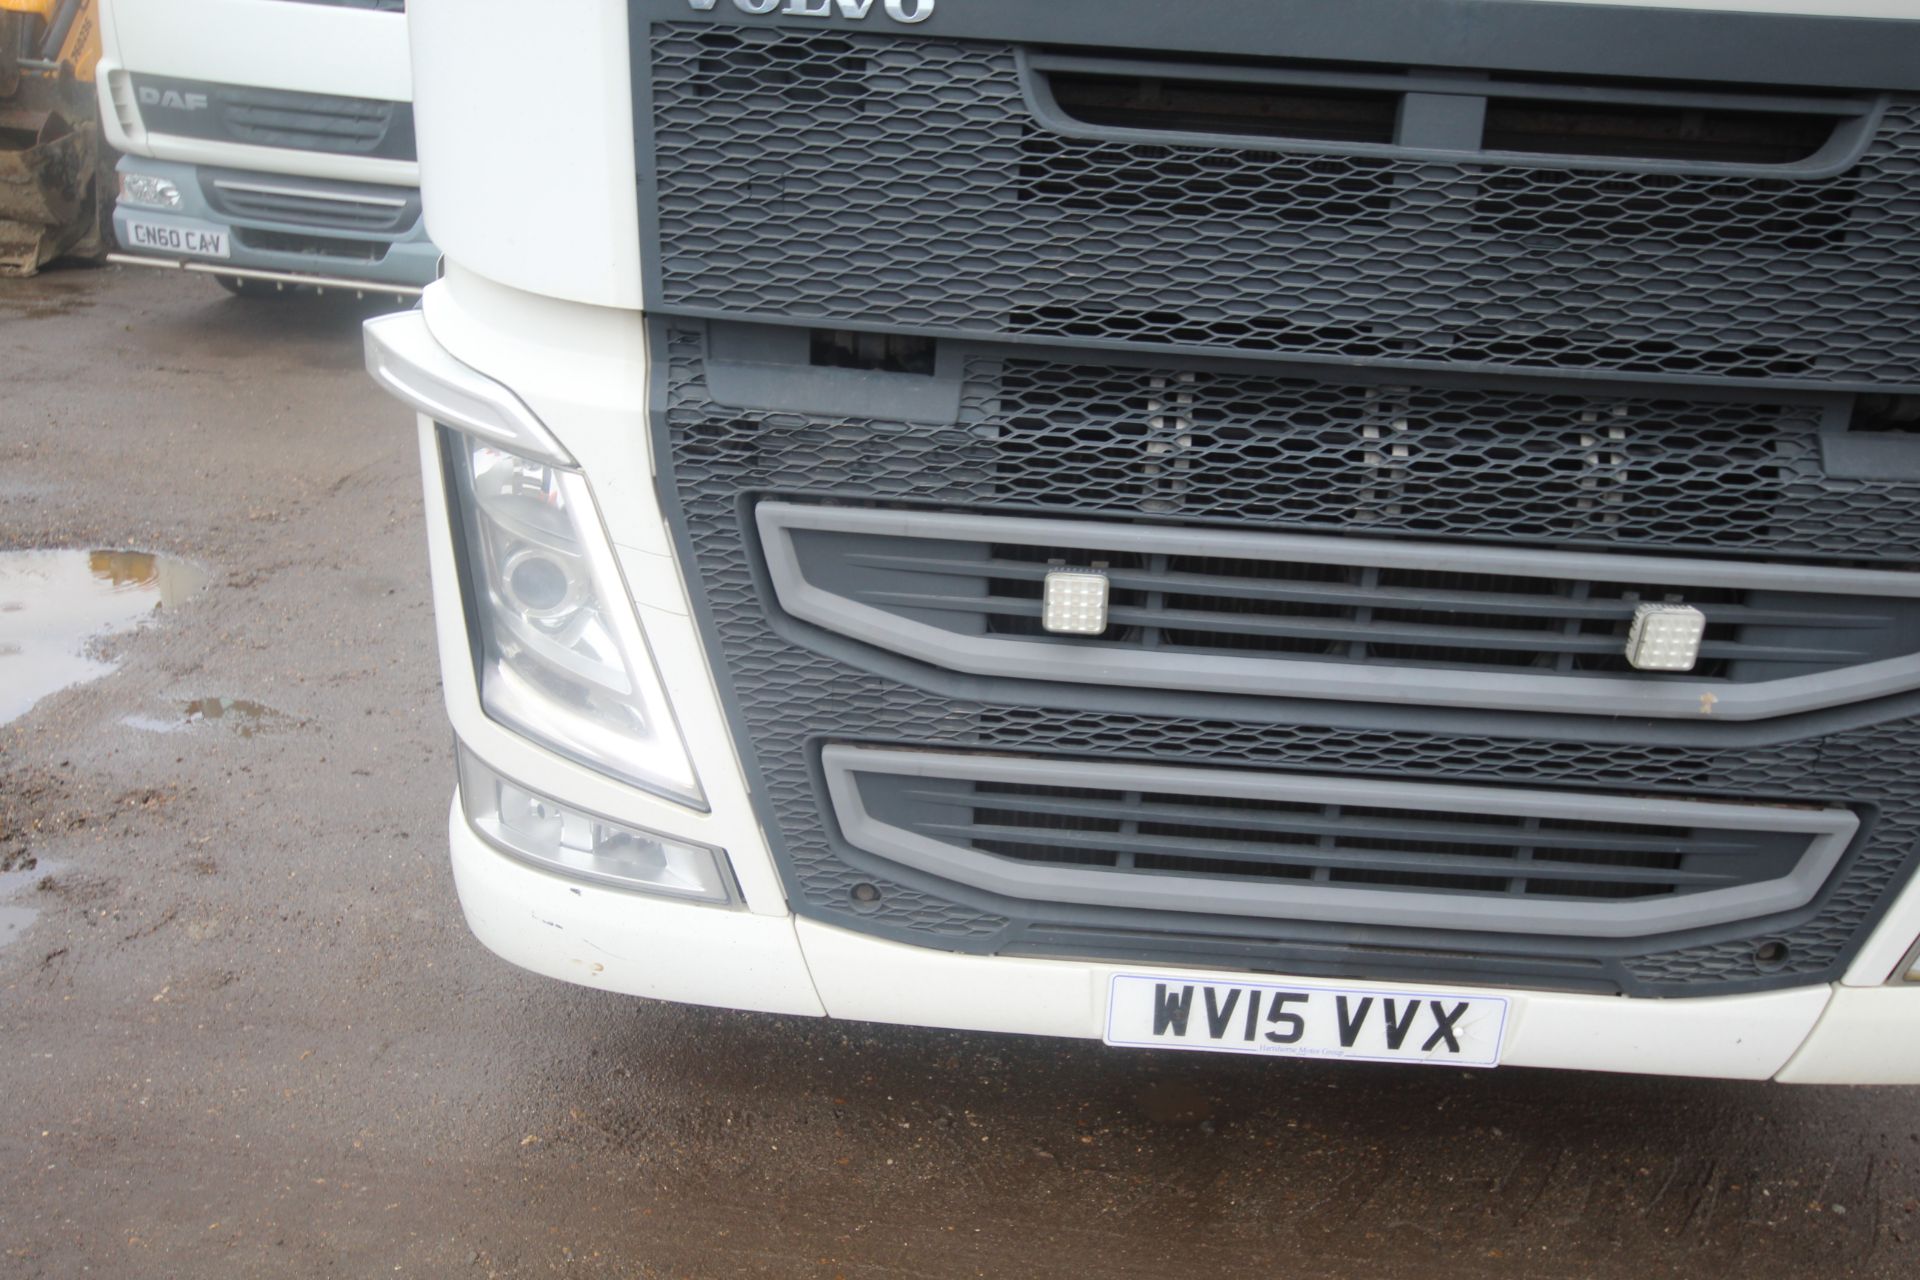 Volvo FH 460 6x2 Euro-6 auto mid-lift 44T unit. Registration WV15 VVX. Date of first registration - Image 67 of 83